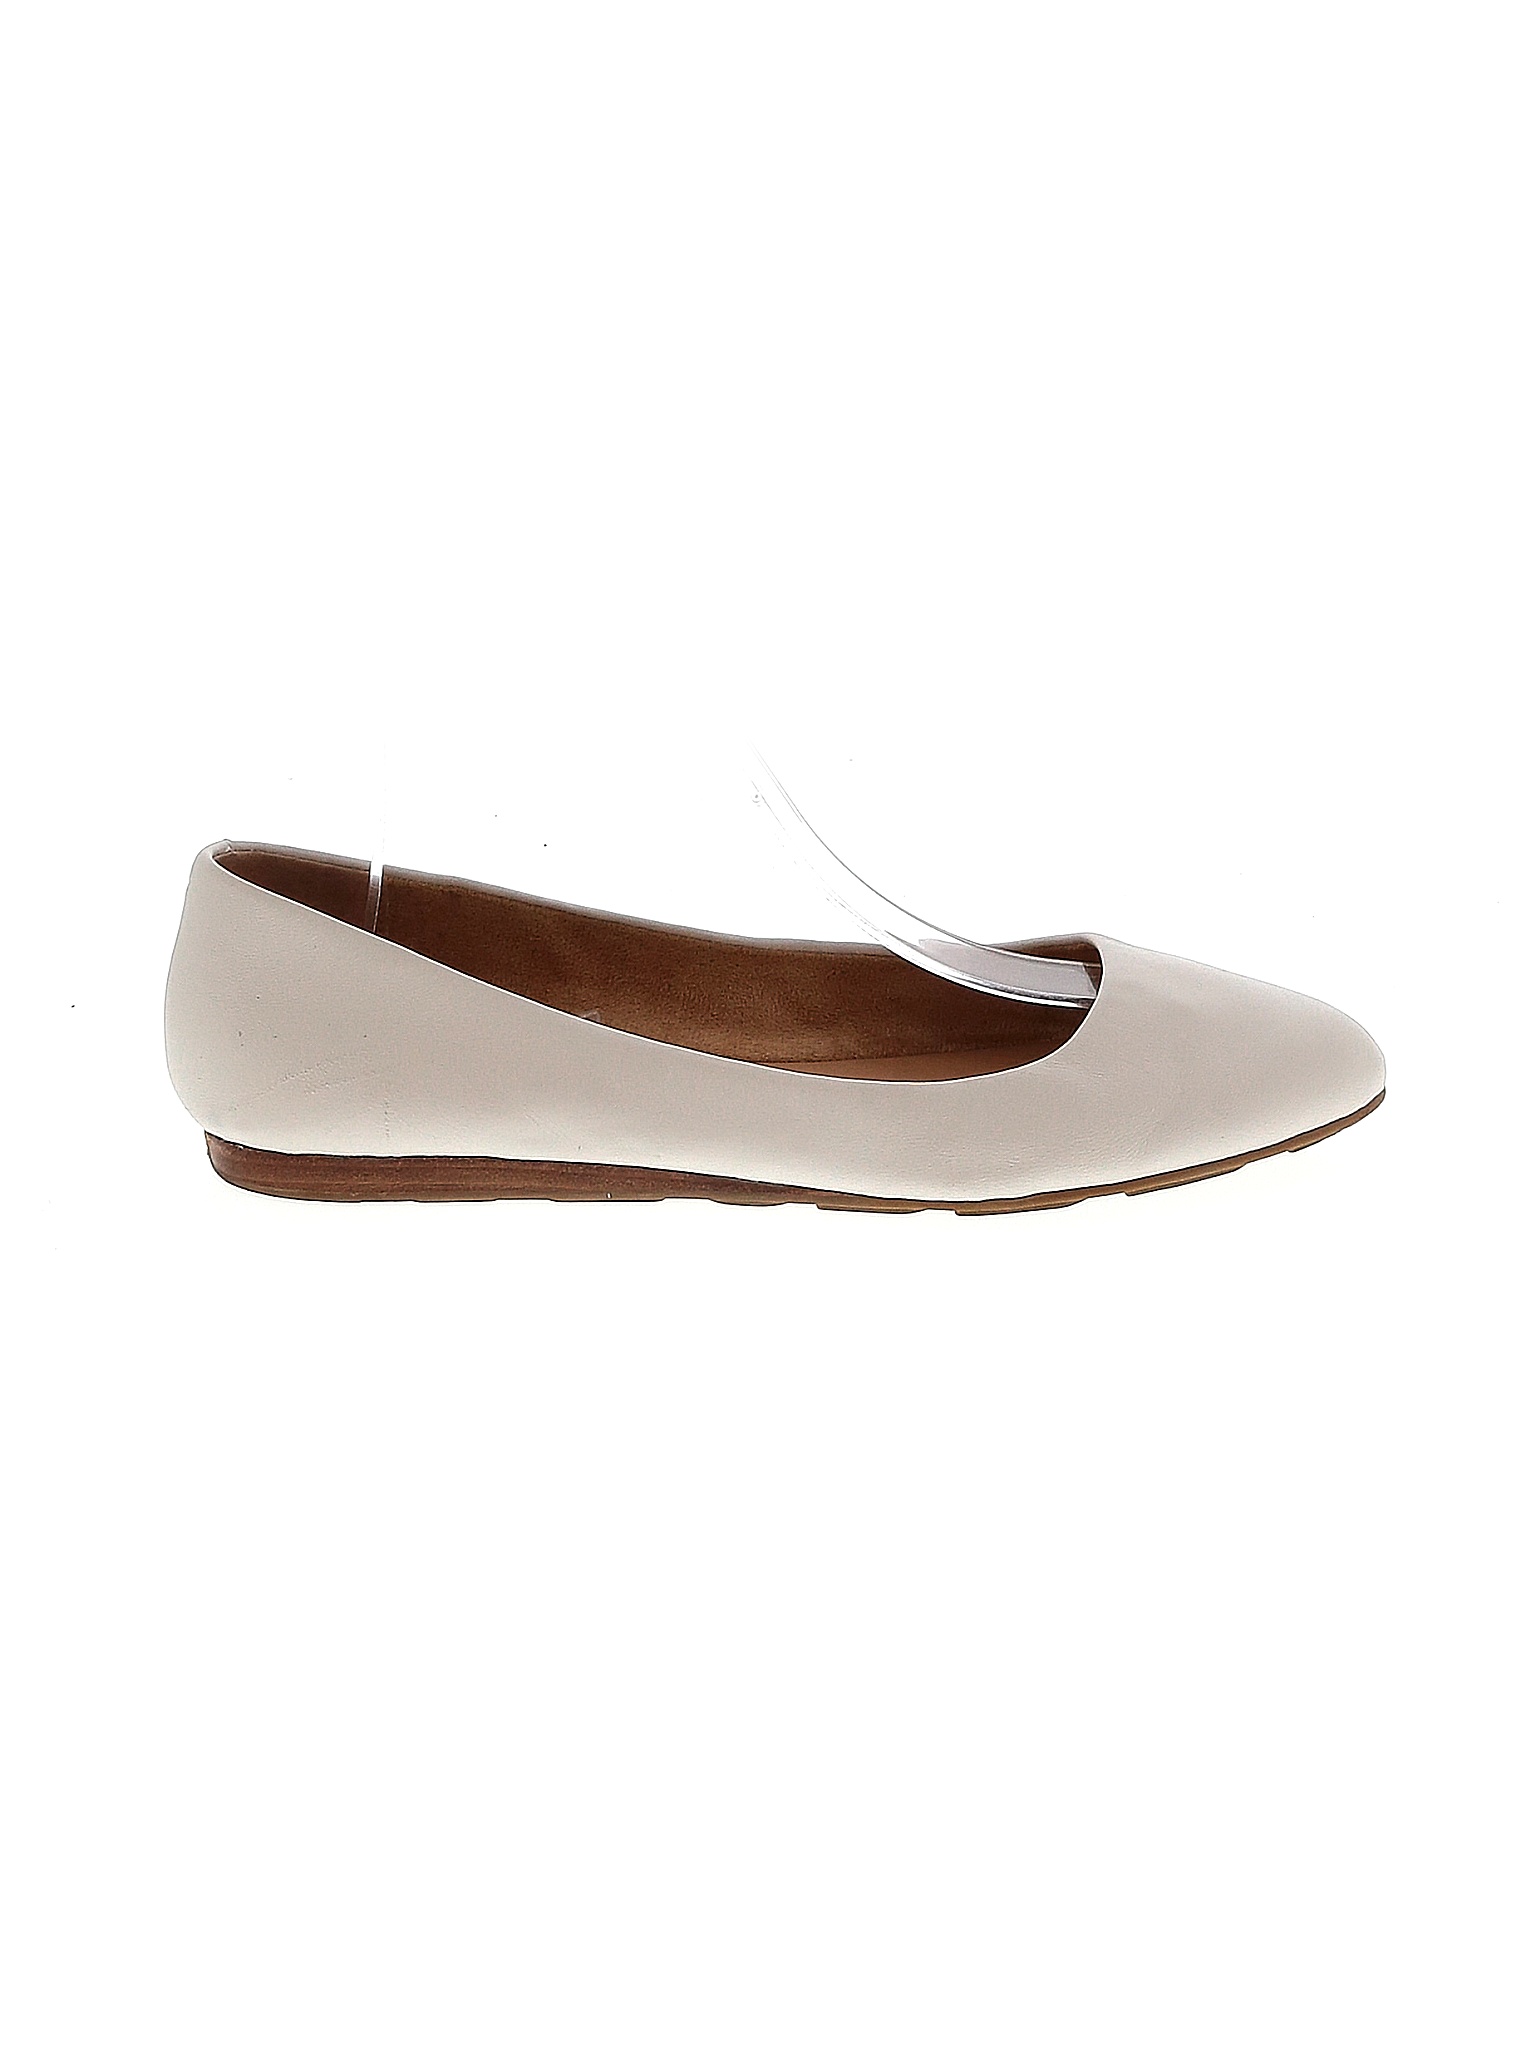 Kelly & Katie 100% Leather Solid White Flats Size 9 - 52% off | thredUP